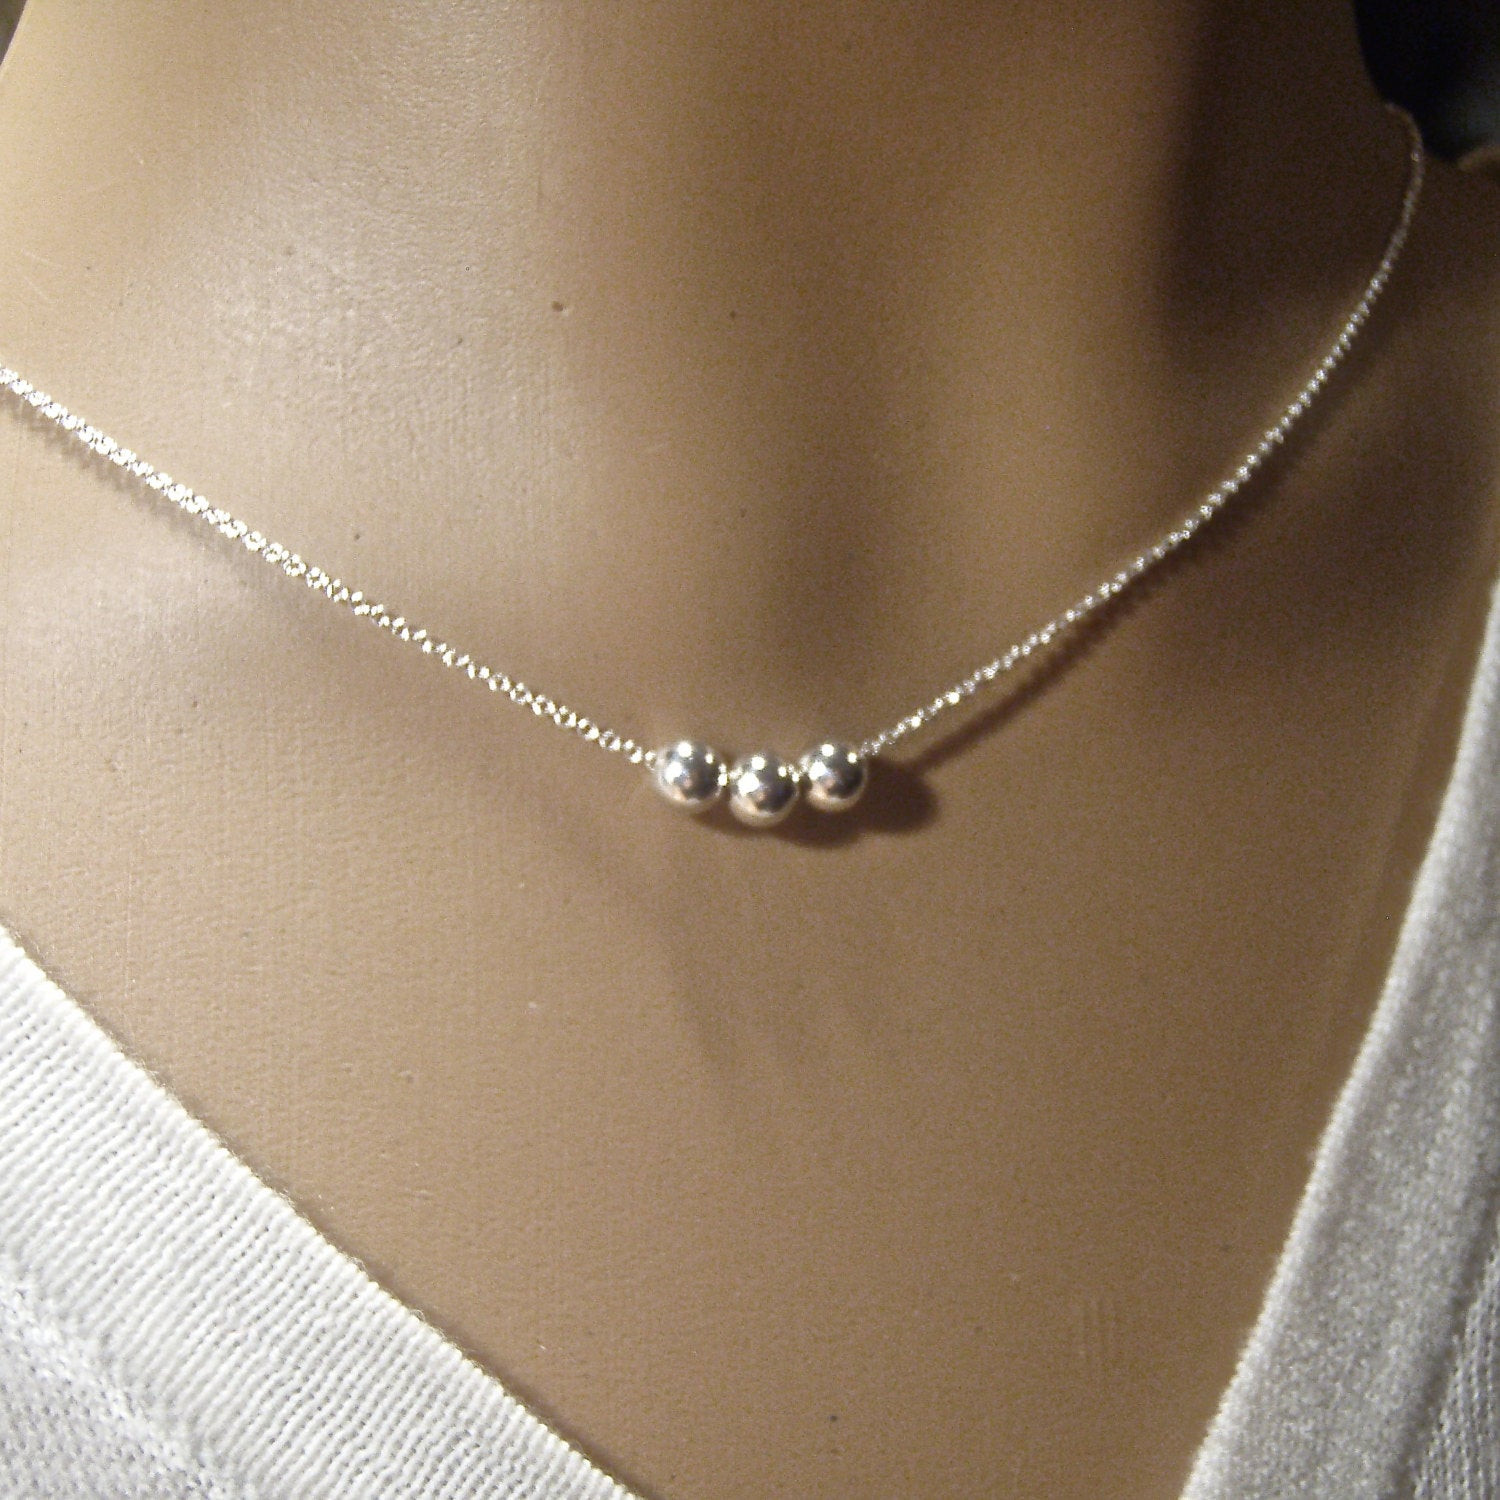 Silver Bead Necklace
 Silver bead necklace Danity silver ball necklace Sterling